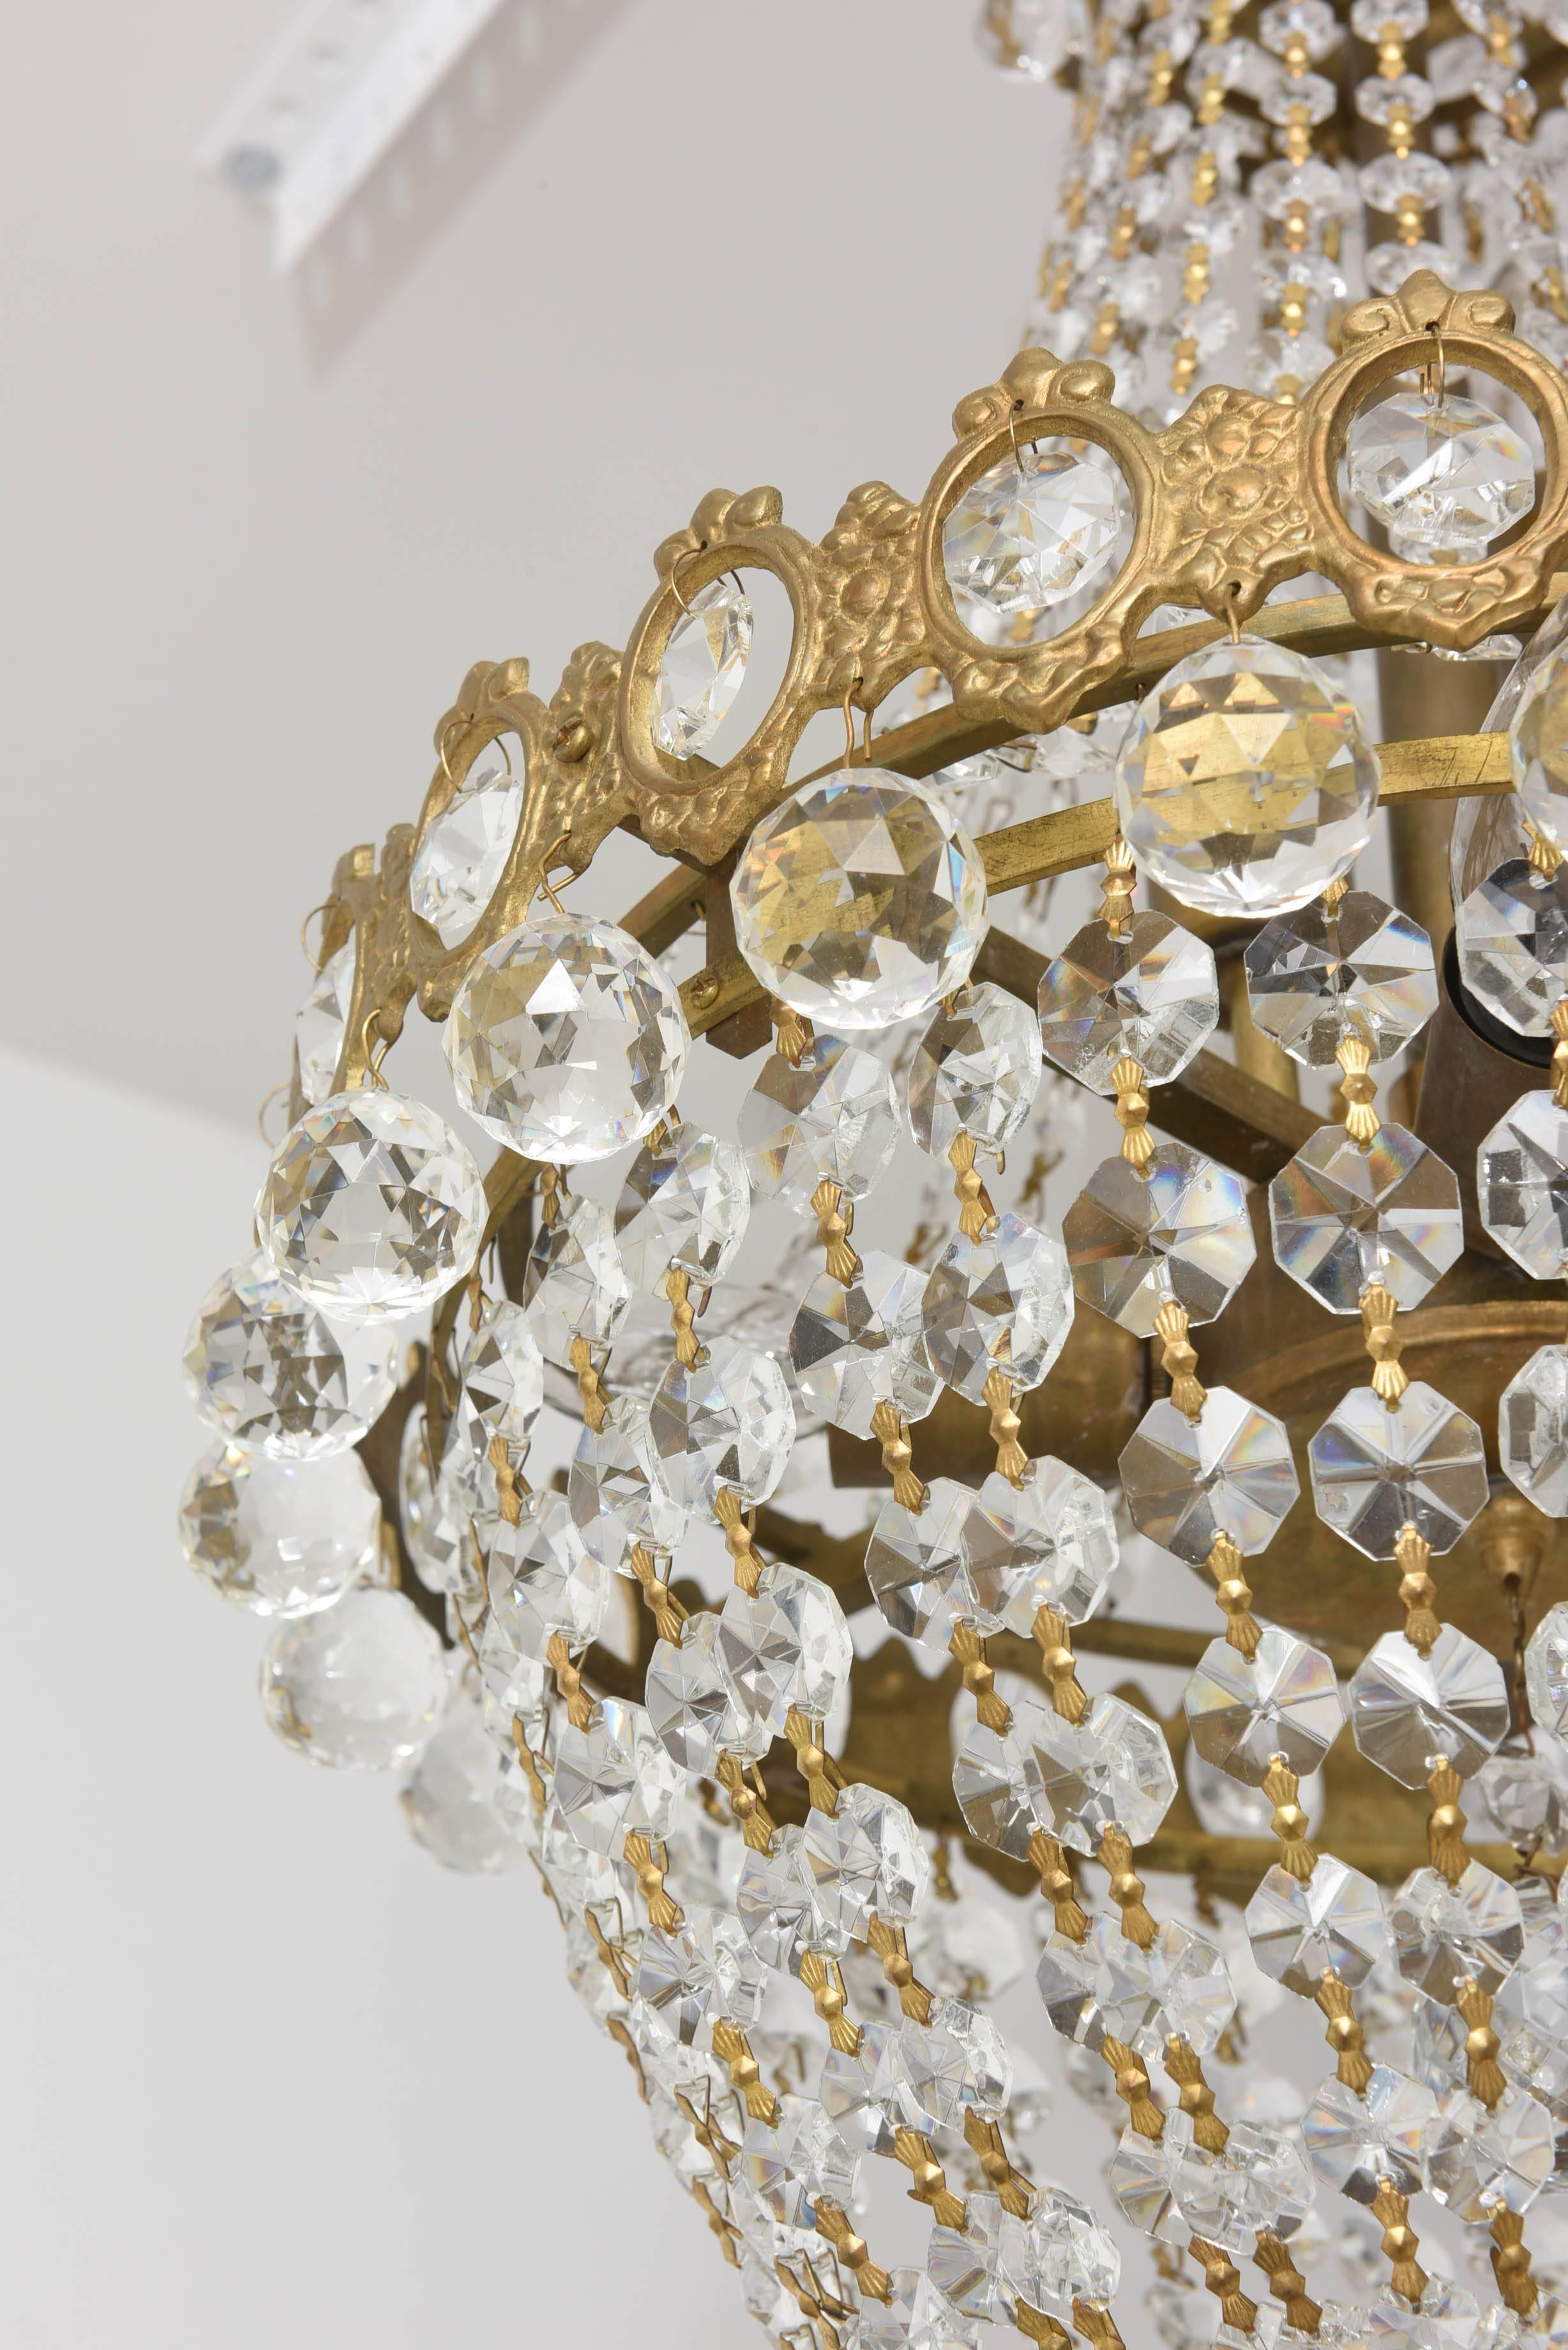 Italian Hollywood Regency, Louis XVI Style Chandelier in Antique Brass and Crystals